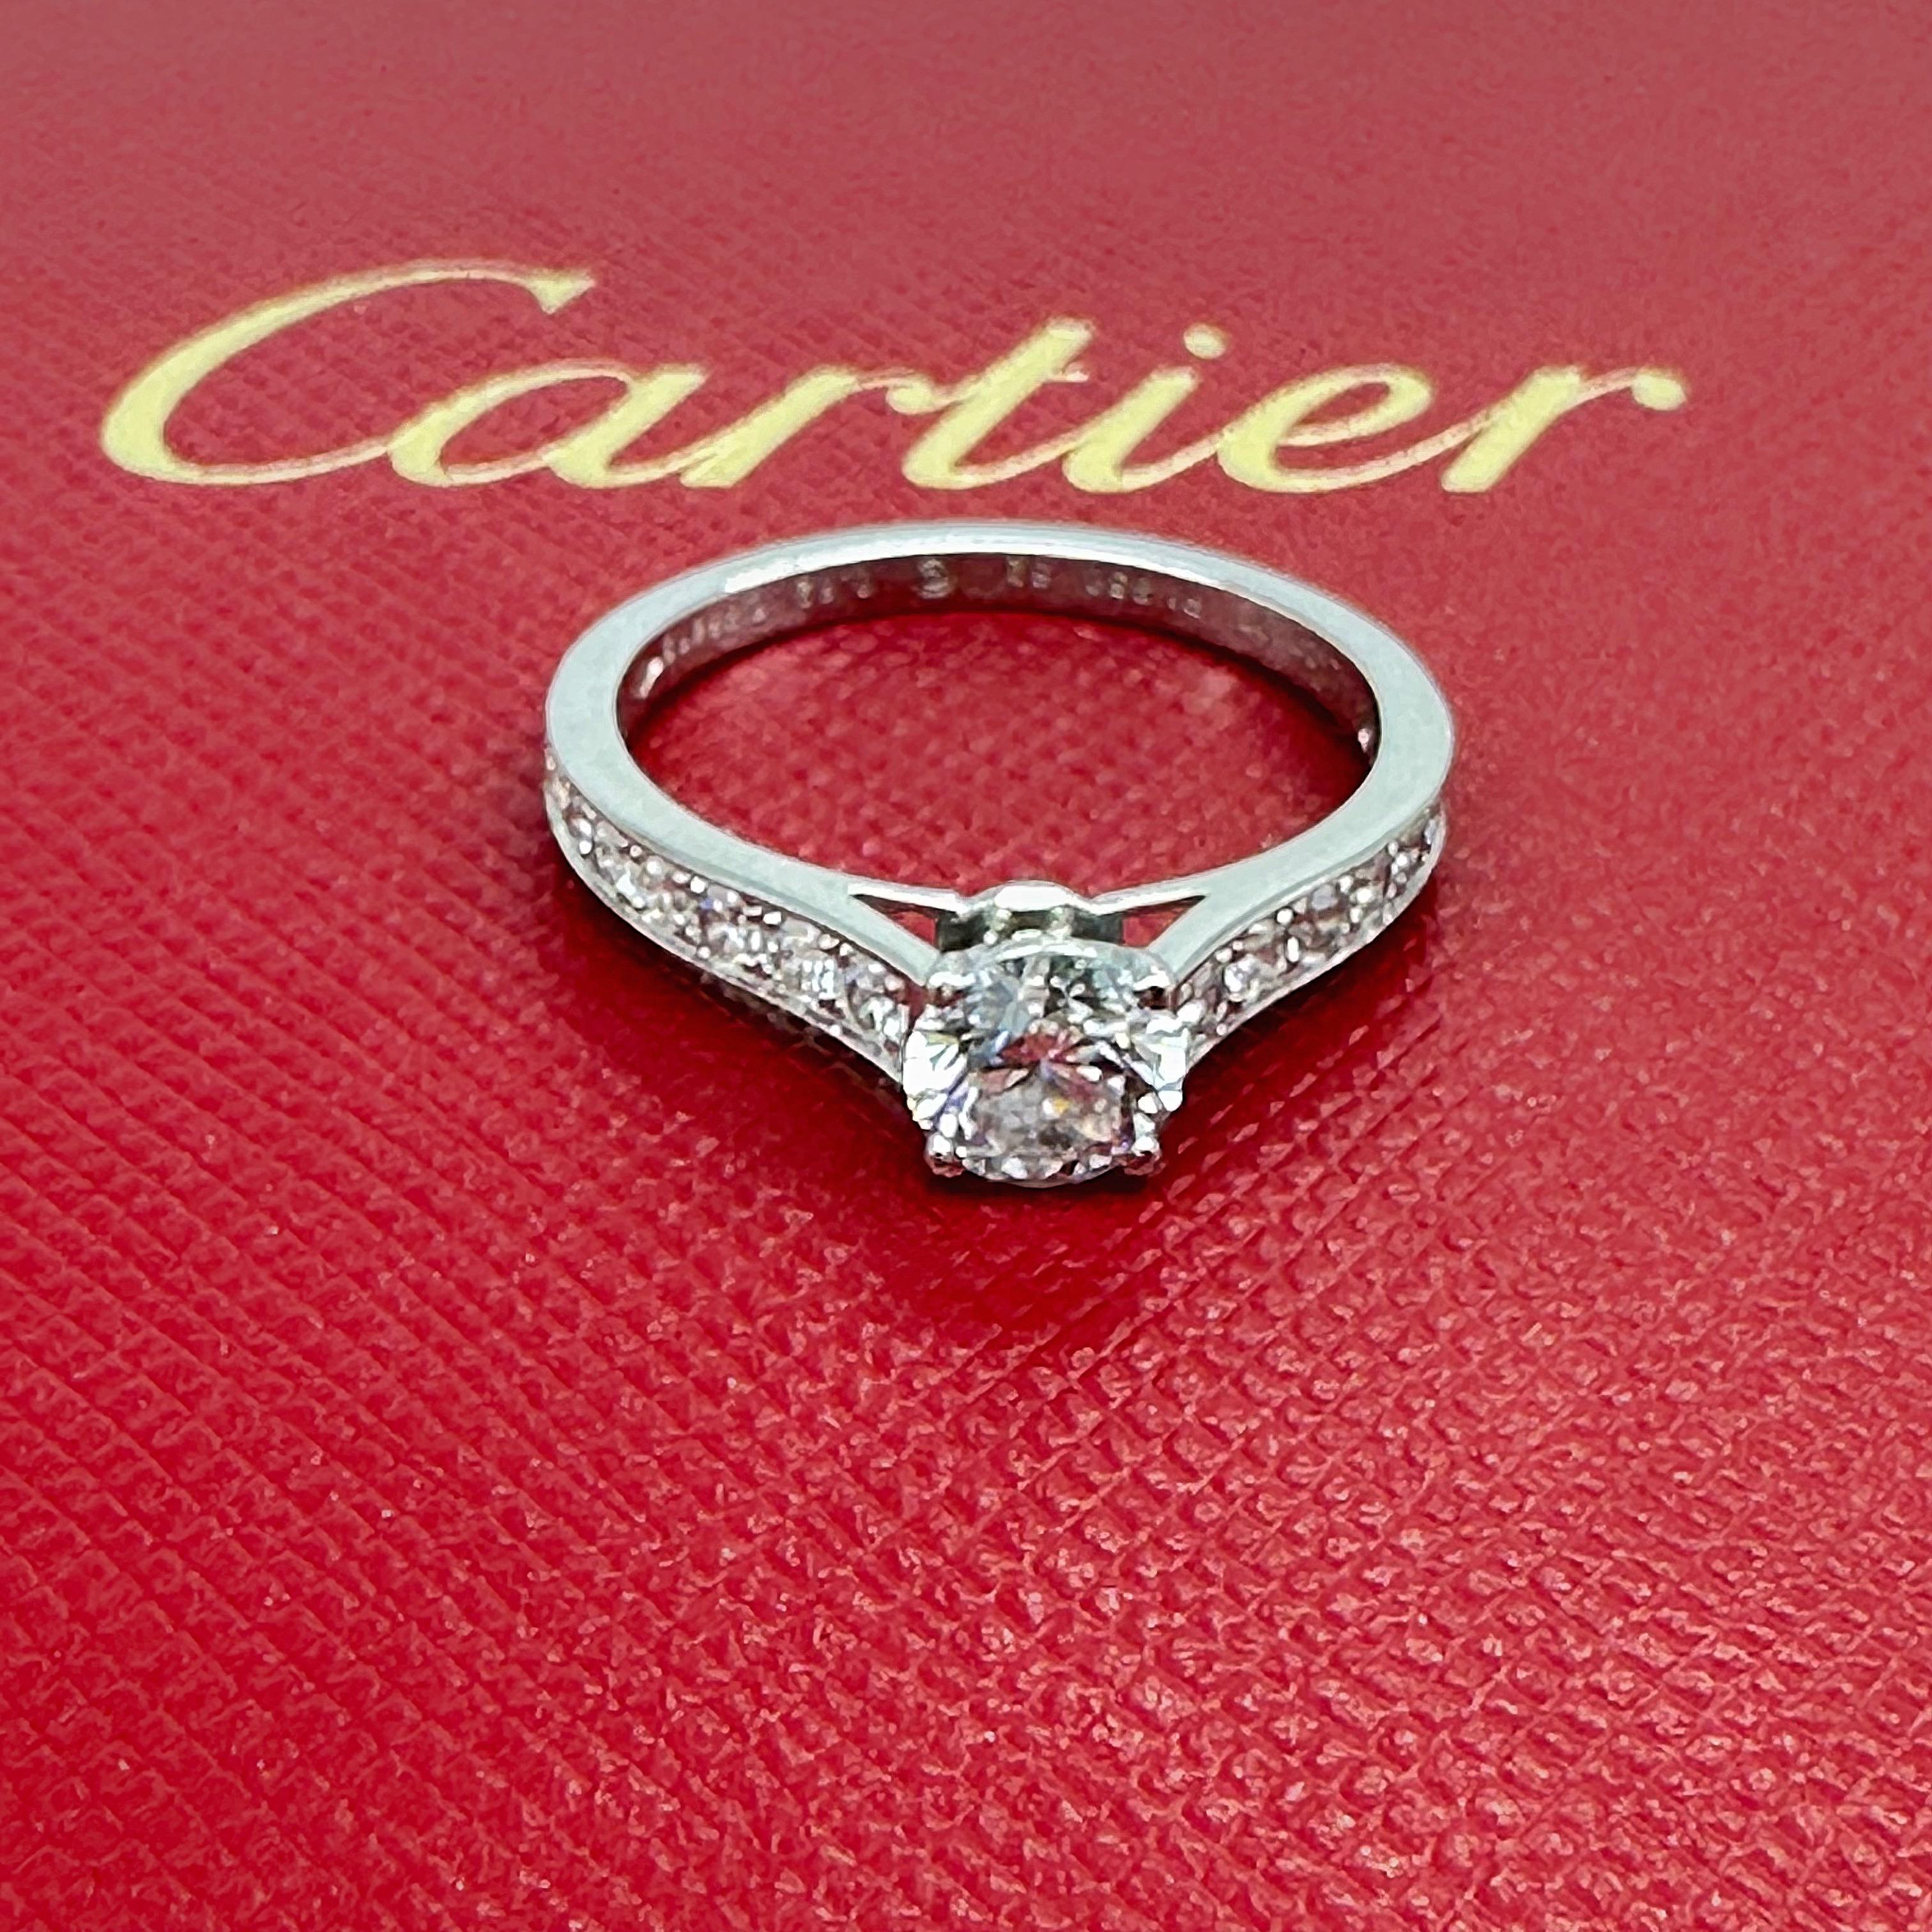 Cartier 1895 Diamond Engagement Ring
Style:  Solitaire with Diamond Accents
Ref. number:  QF****
Metal:  Platinum PT950
GIA:  2106981161
Size:  6.25
TCW:  0.88 tcw
Main Diamond:  Round Brilliant Diamond 0.62 cts
Color & Clarity:  E, VVS2
Accent